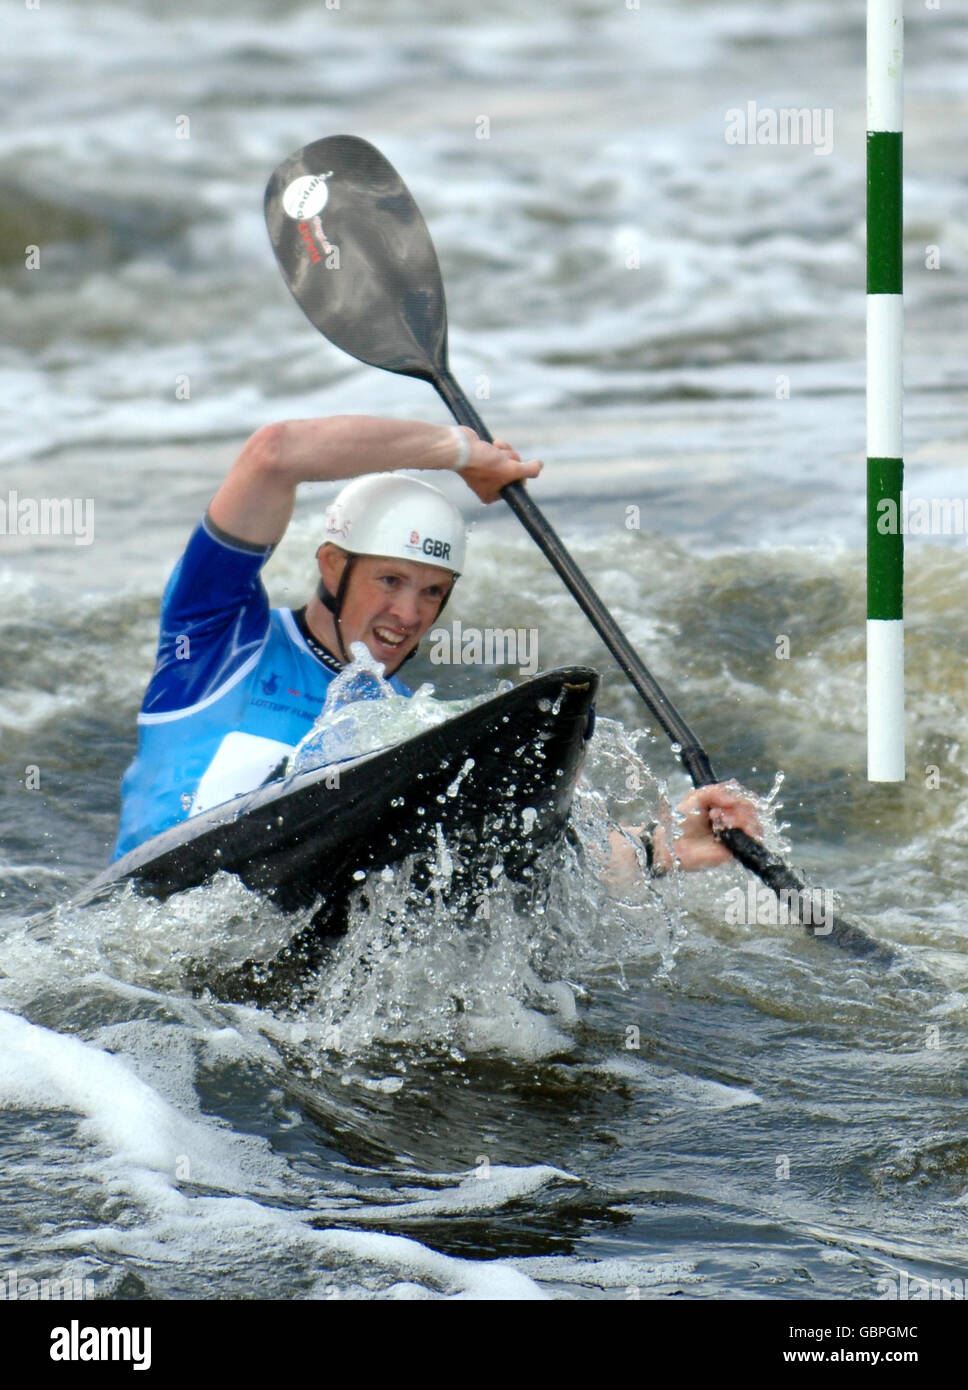 Great Britain's Campbell Walsh during Run 1 of the First Round of the Men's K1 during the European Slalom Championships at Holme Pierrepont, Nottingham. Stock Photo